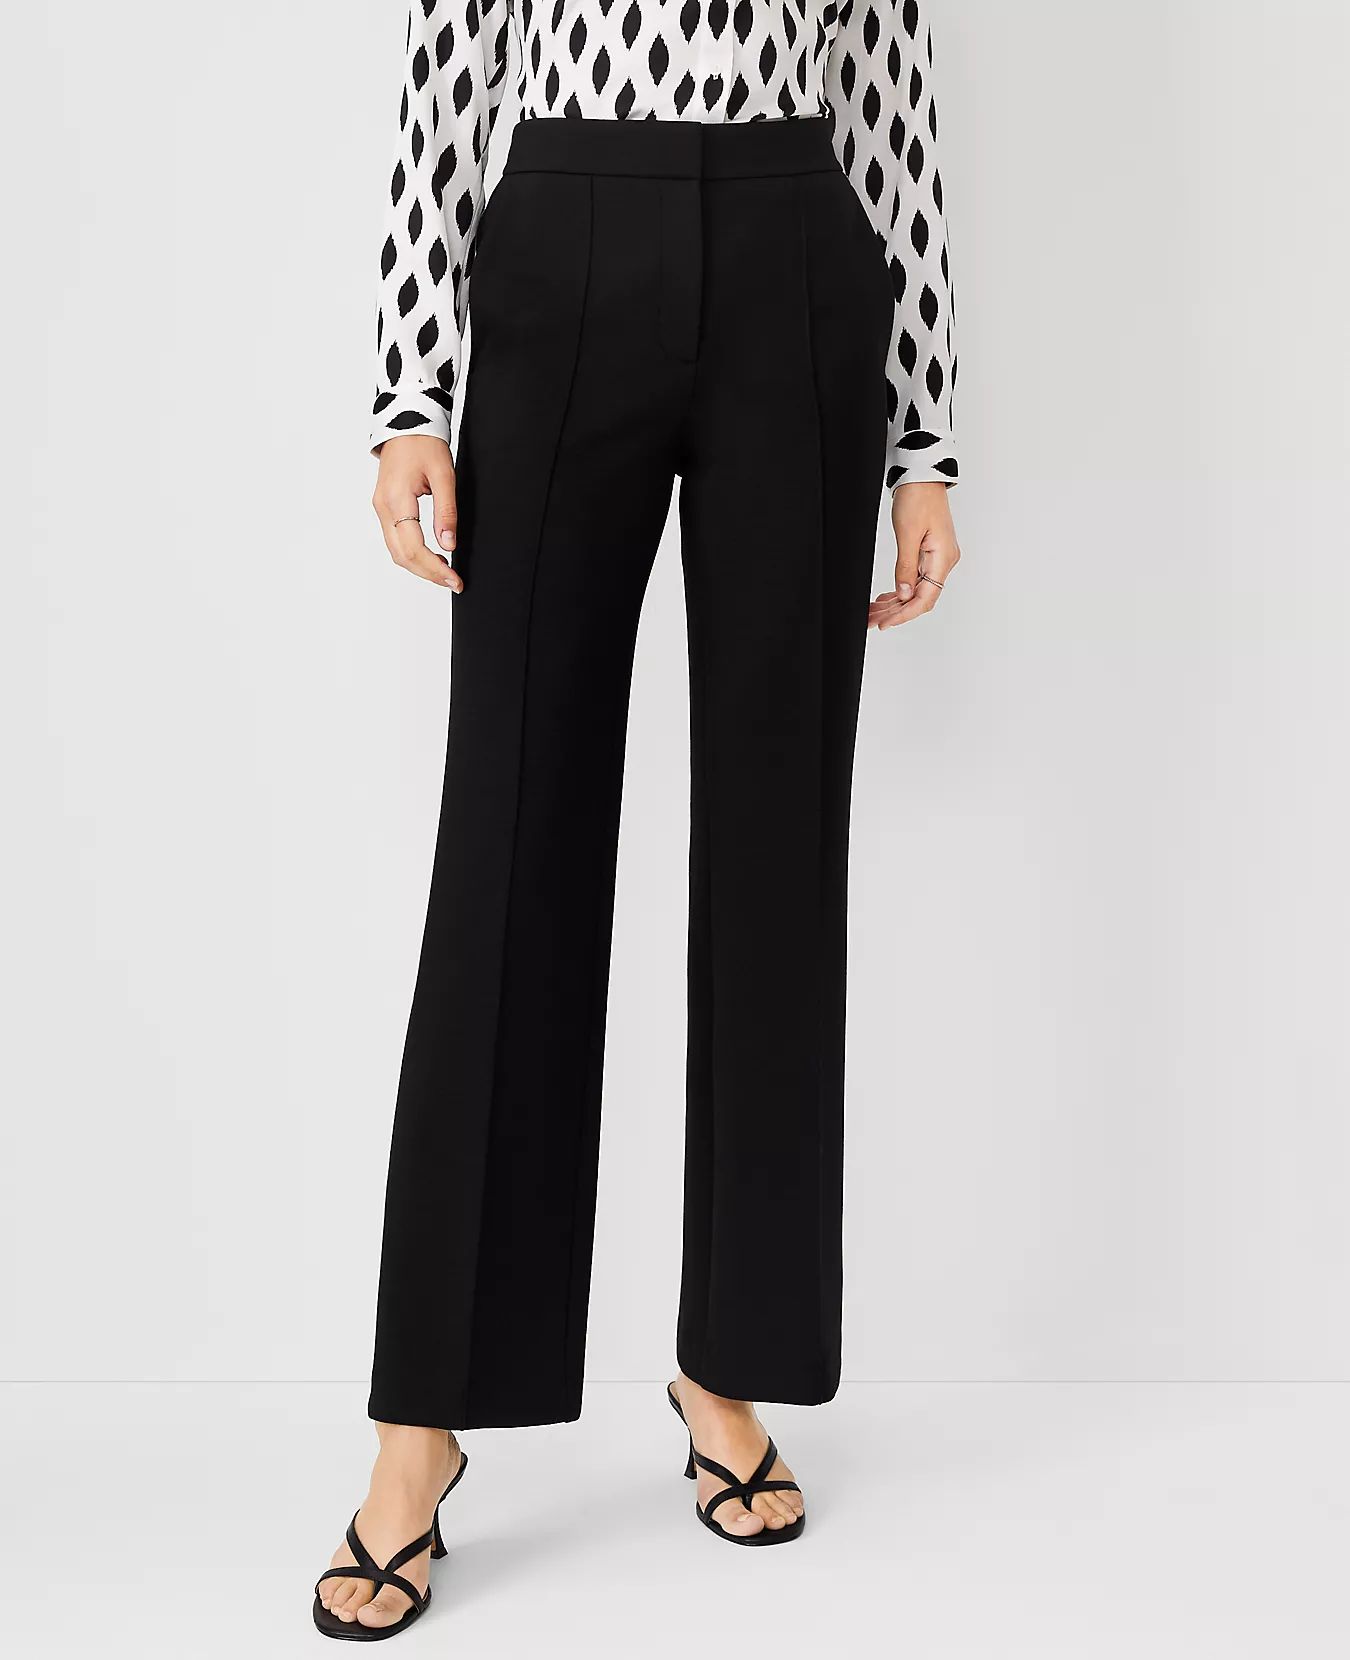 The Petite Pintucked High Waist Trouser Pant in Double Knit | Ann Taylor (US)